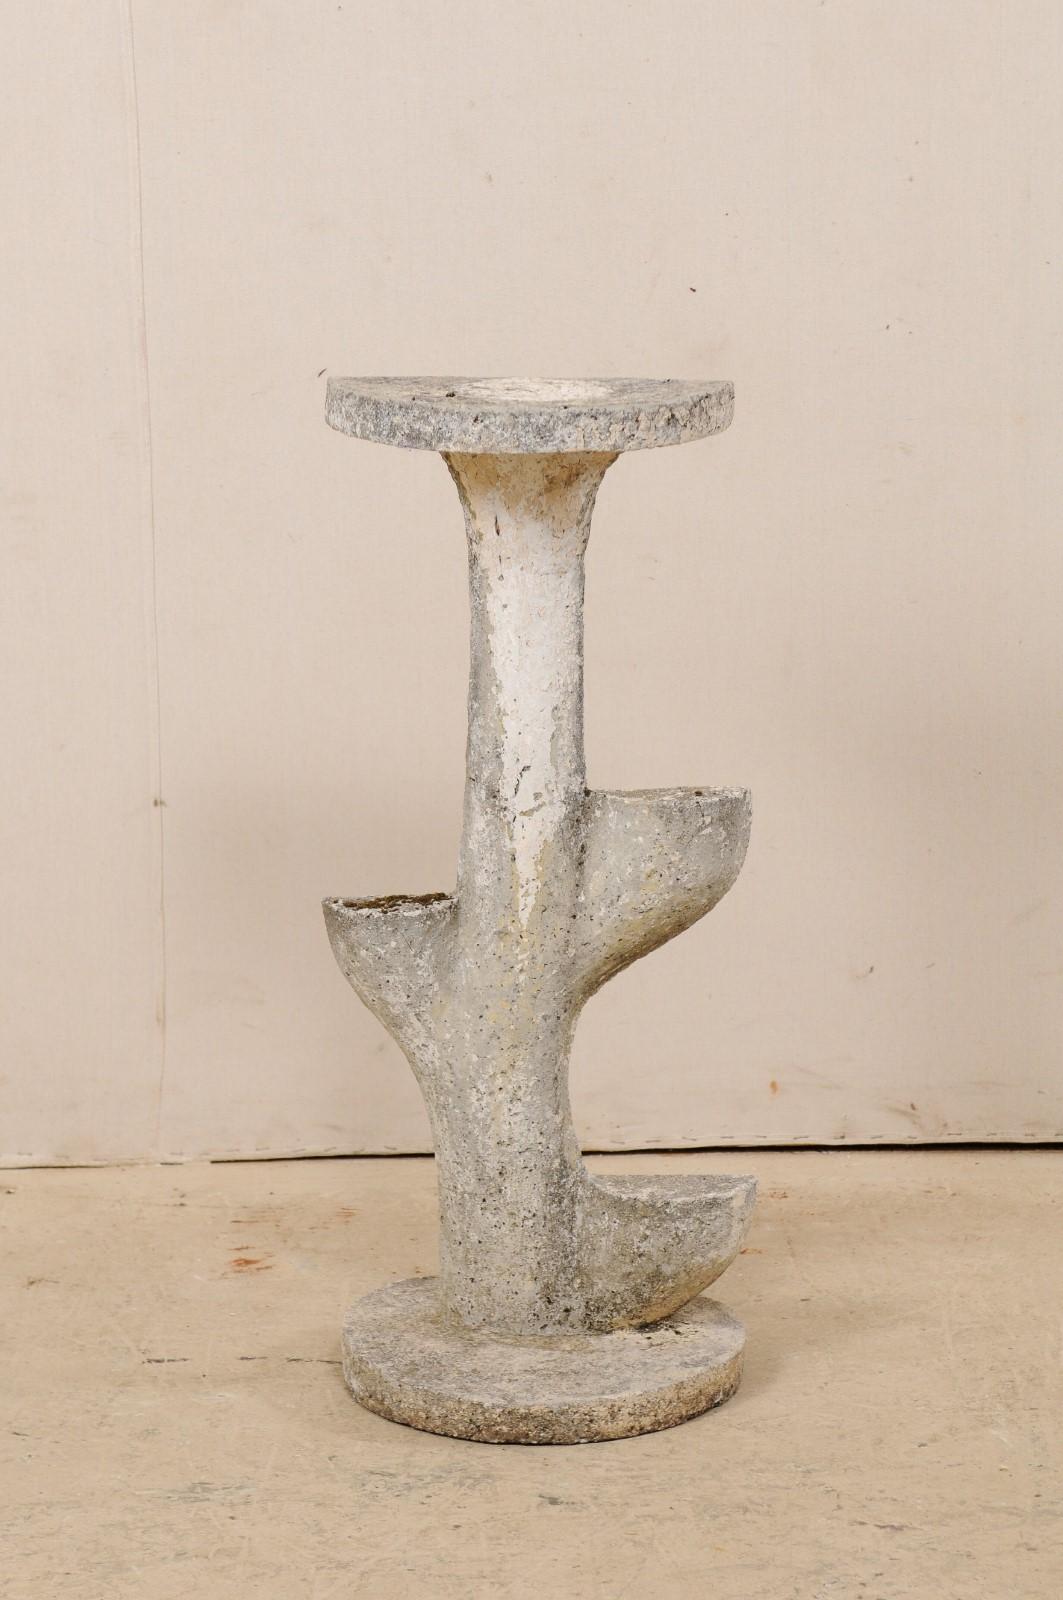 A French garden foliage inspired and tiered sculptural shelf from the mid-20th century. This vintage cast-stone garden or patio decoration from France features a rounded base which supports a foliage inspired shaped sculpture, topped with a